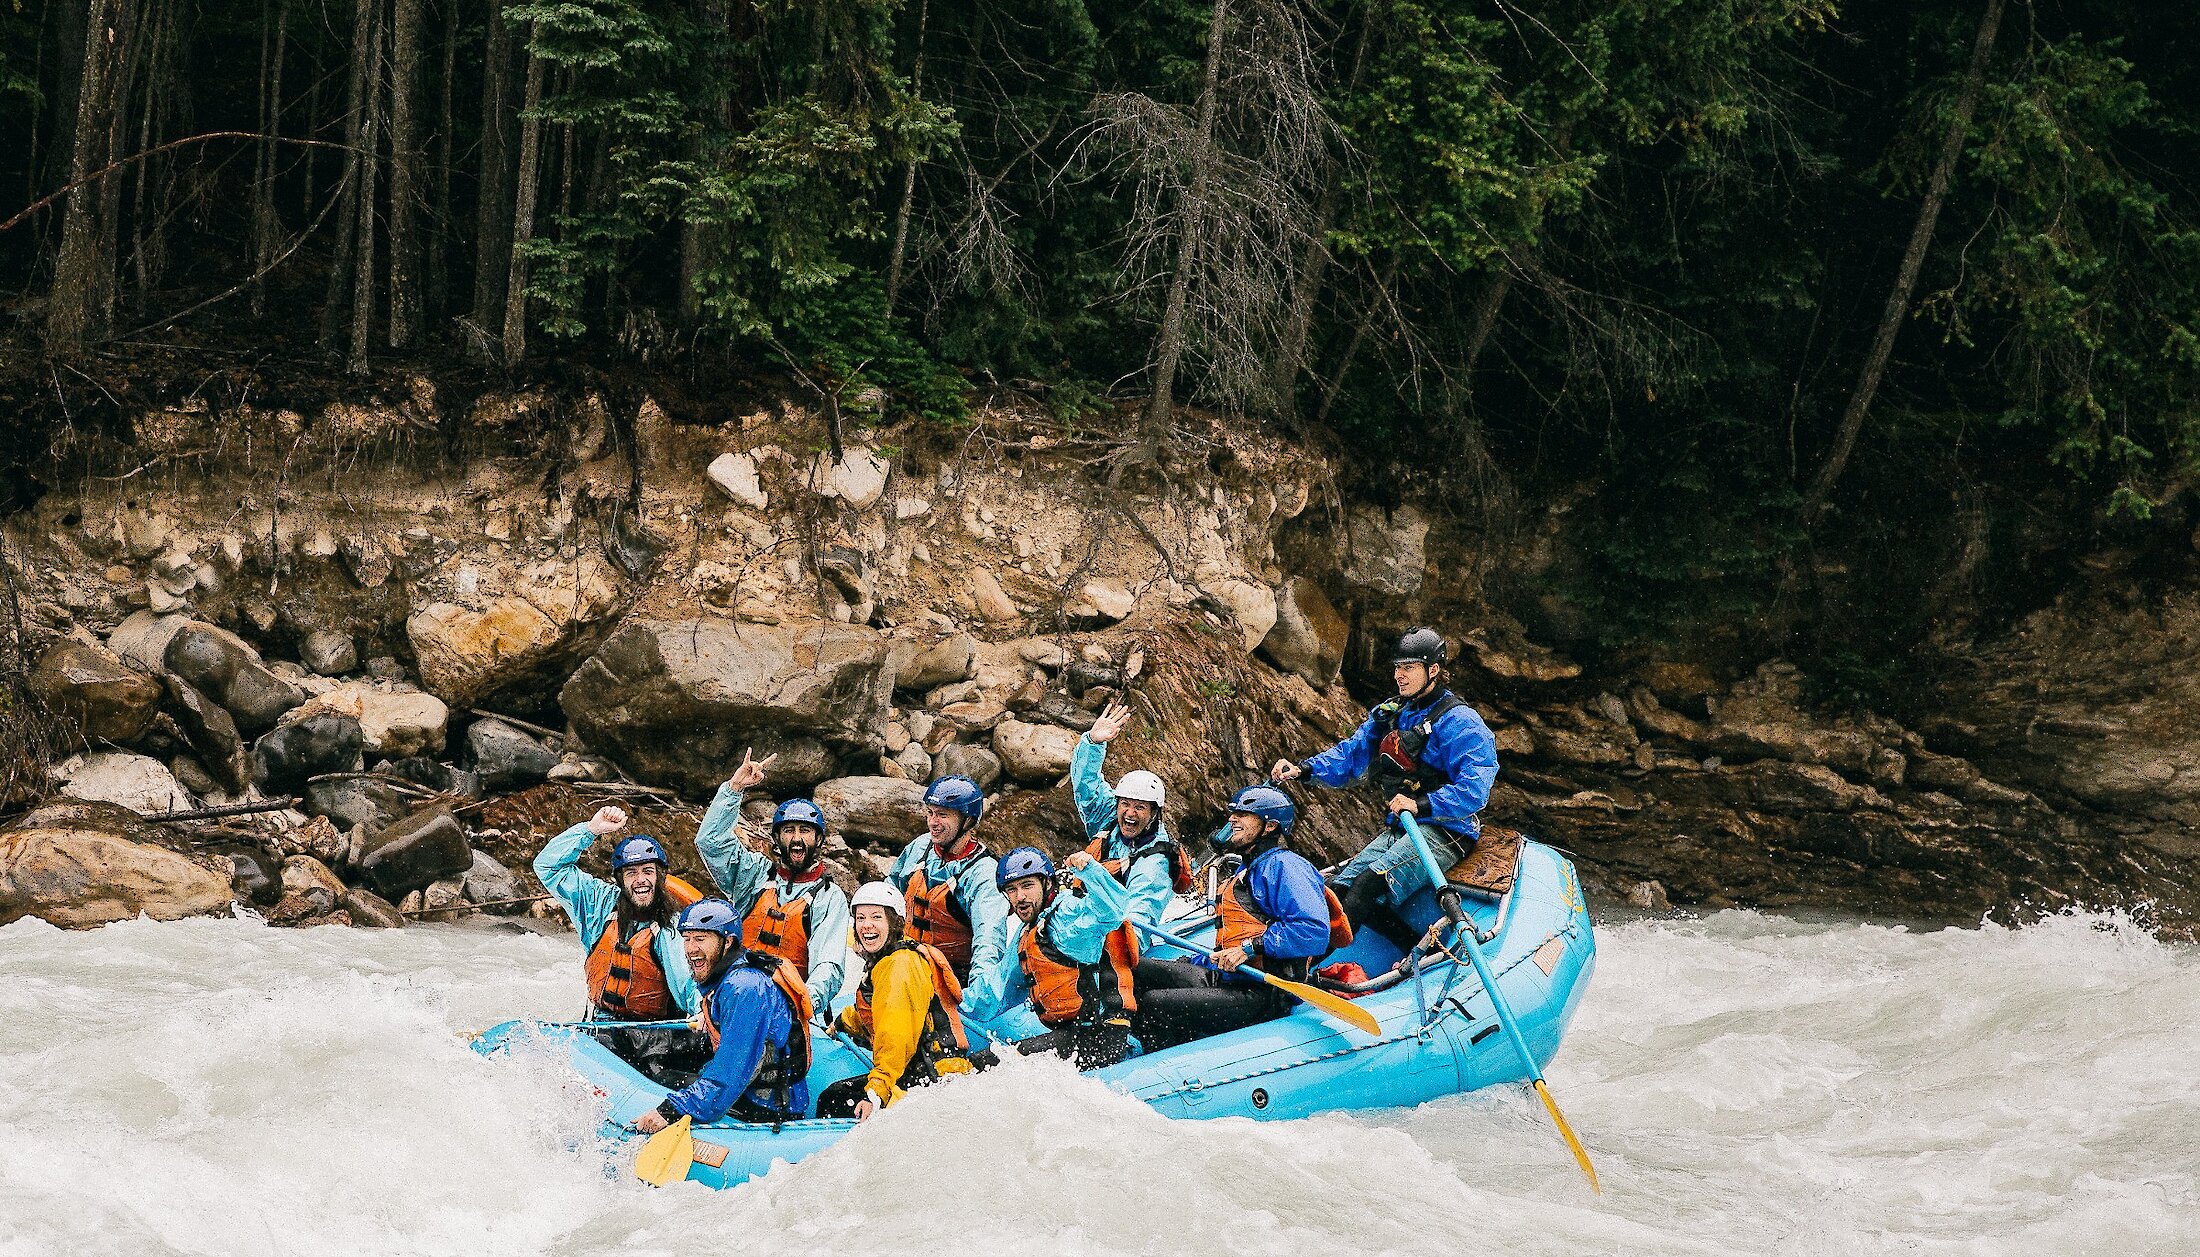 Rafting the rapids on the Kicking Horse River